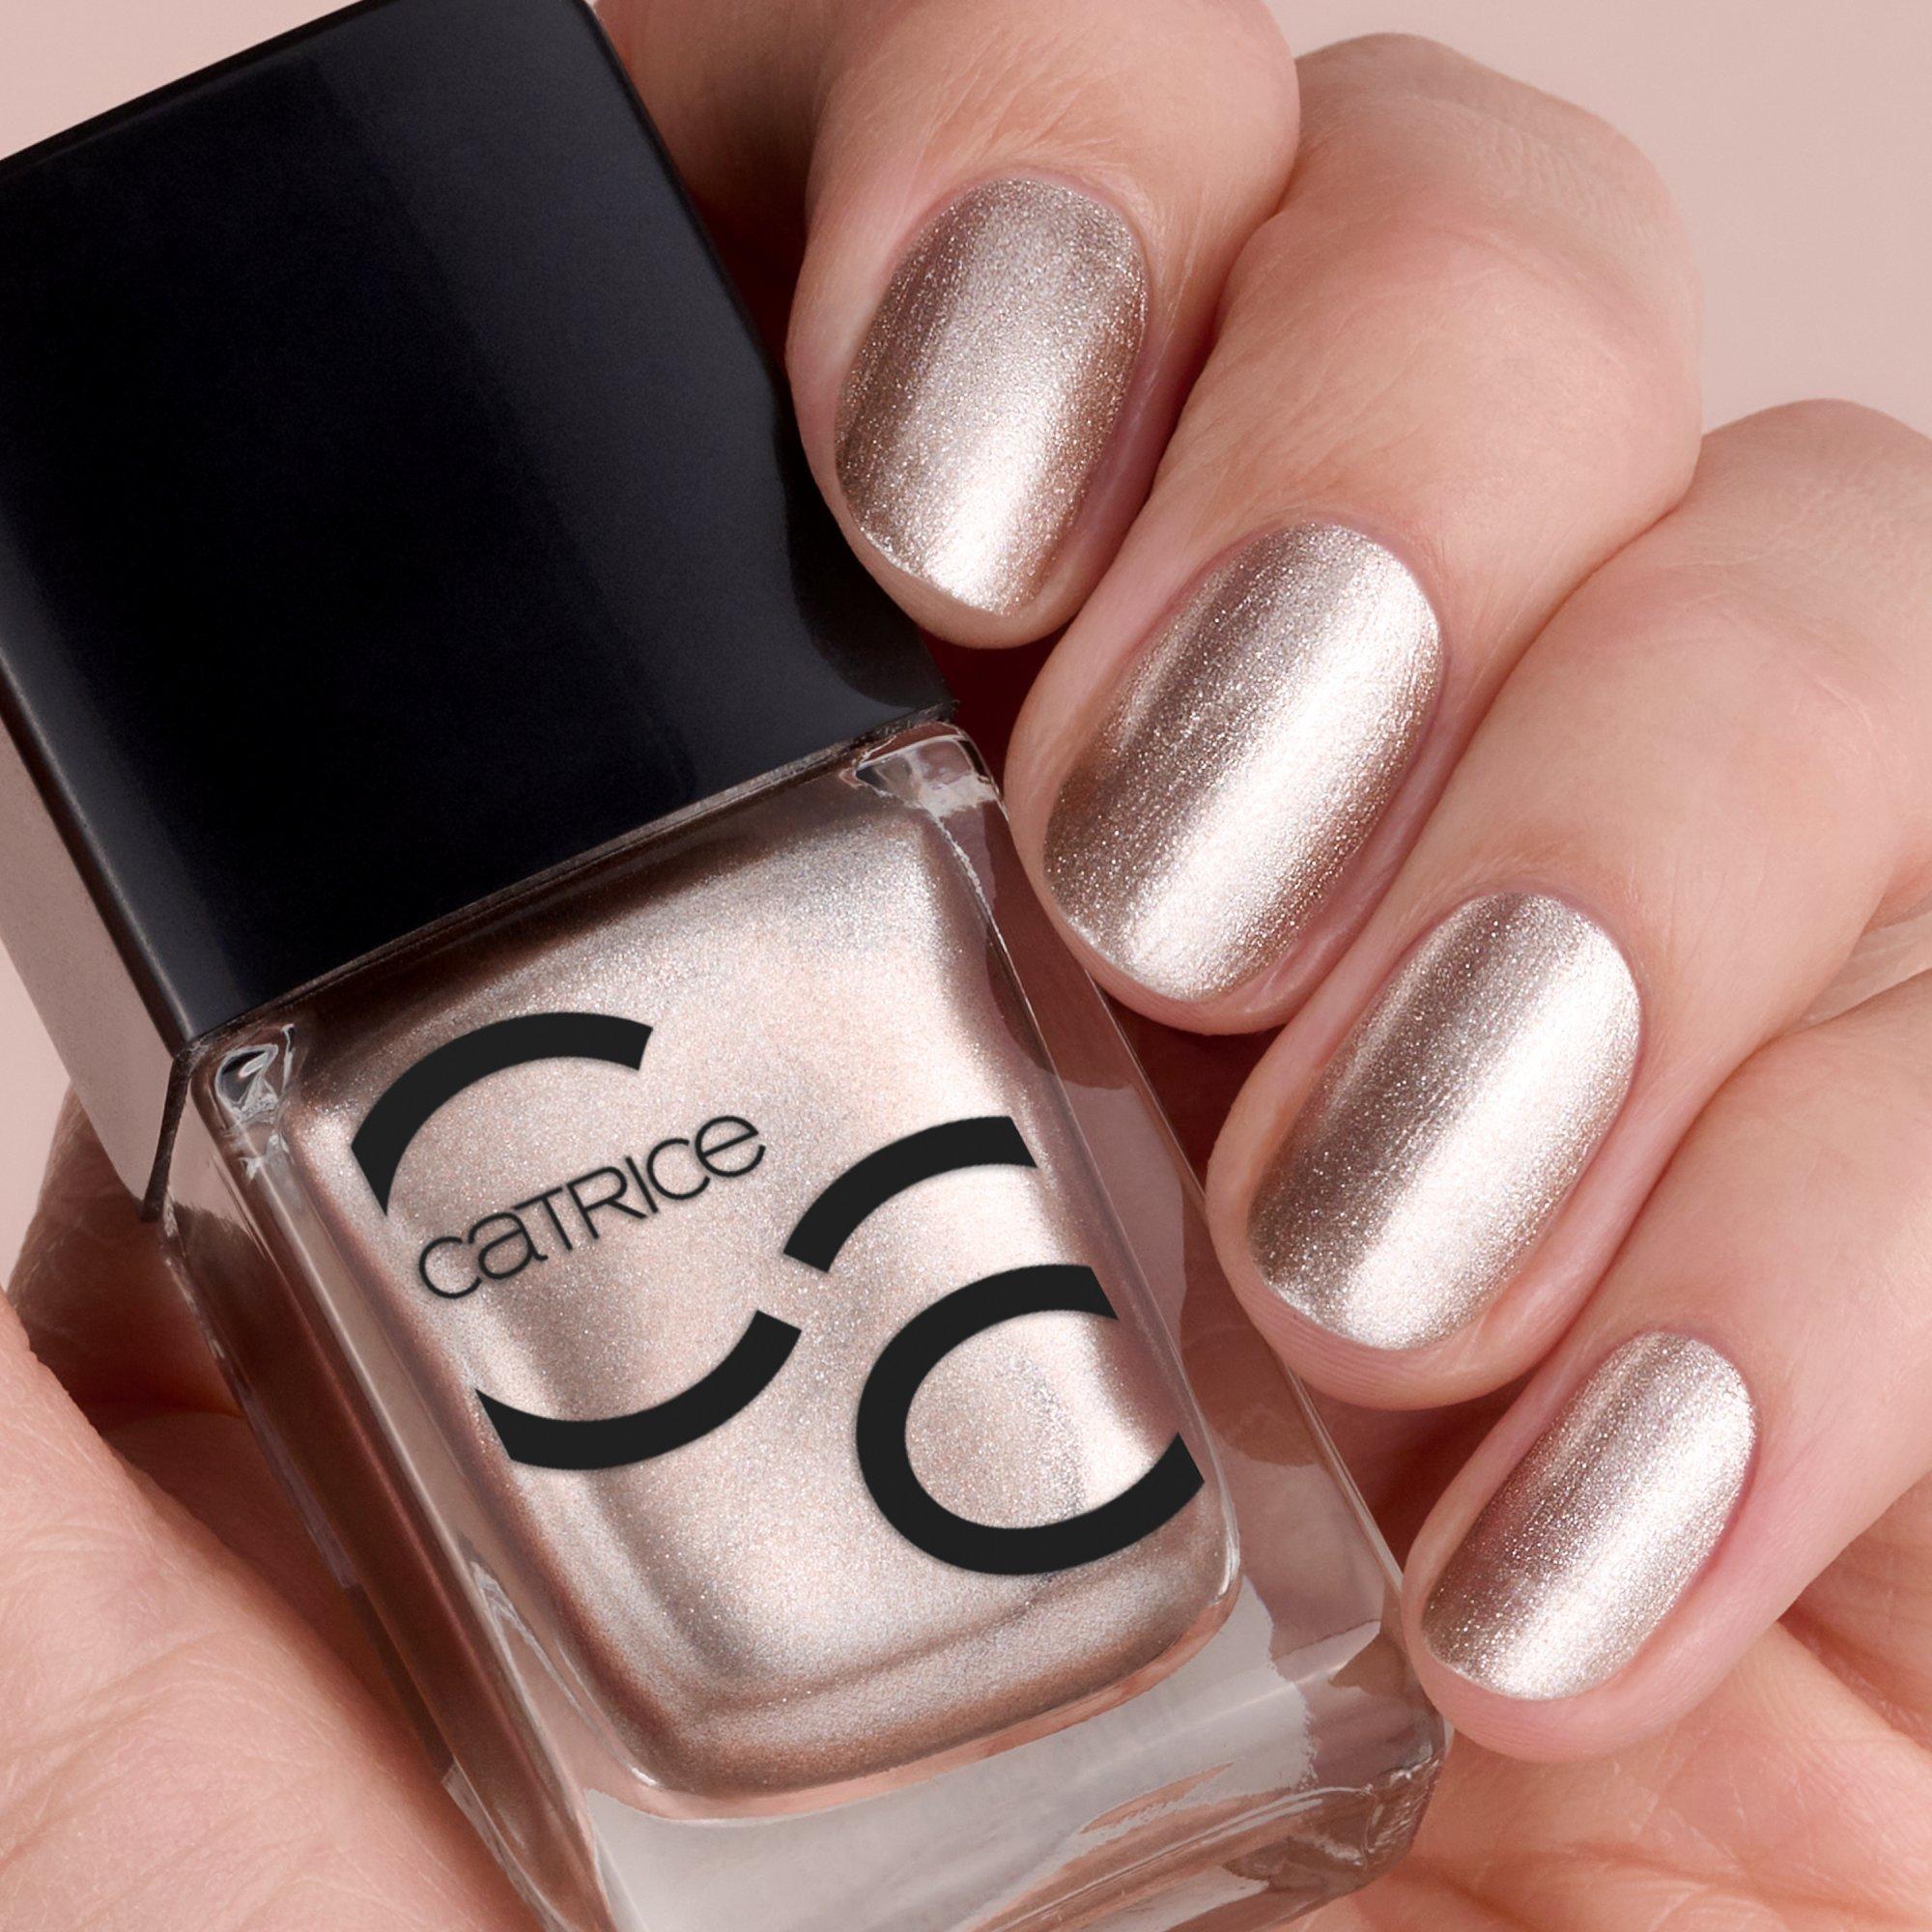 CATRICE ICONails Gel Lacquer Nagellack